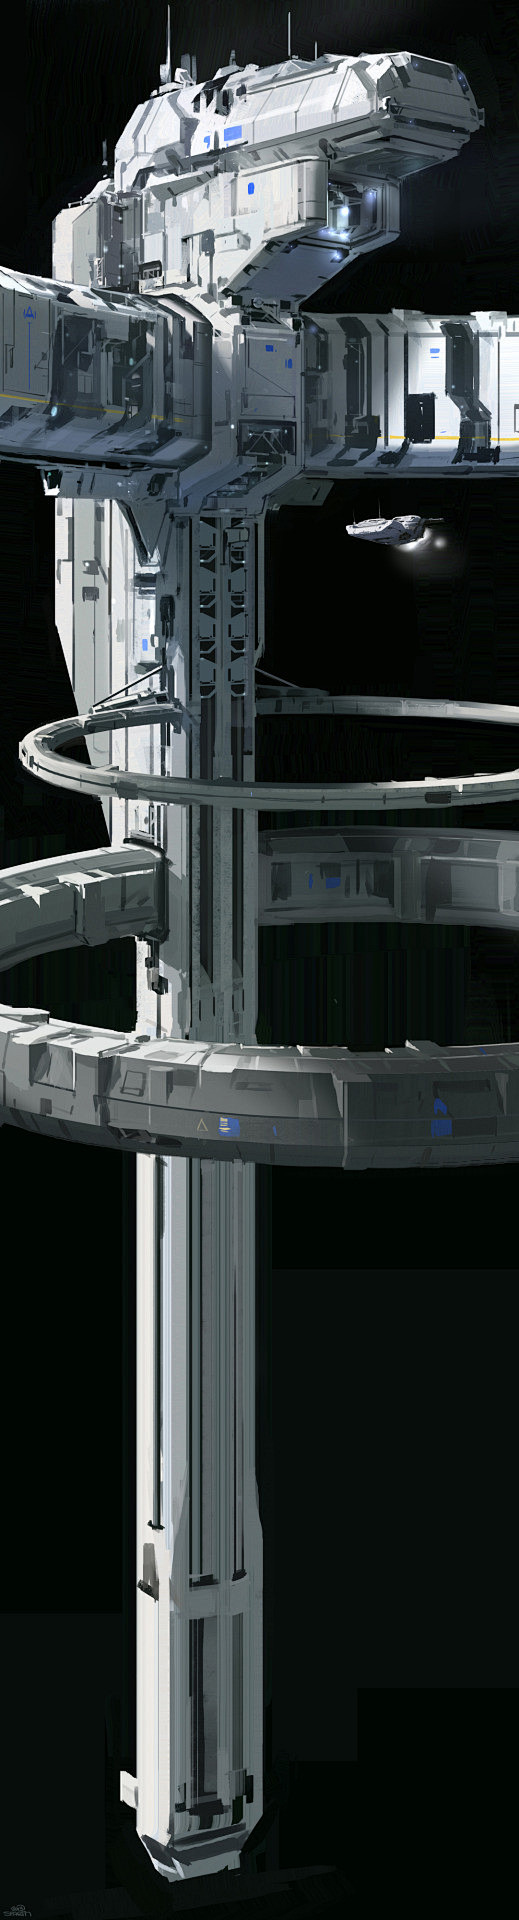 Halo 5 space station...